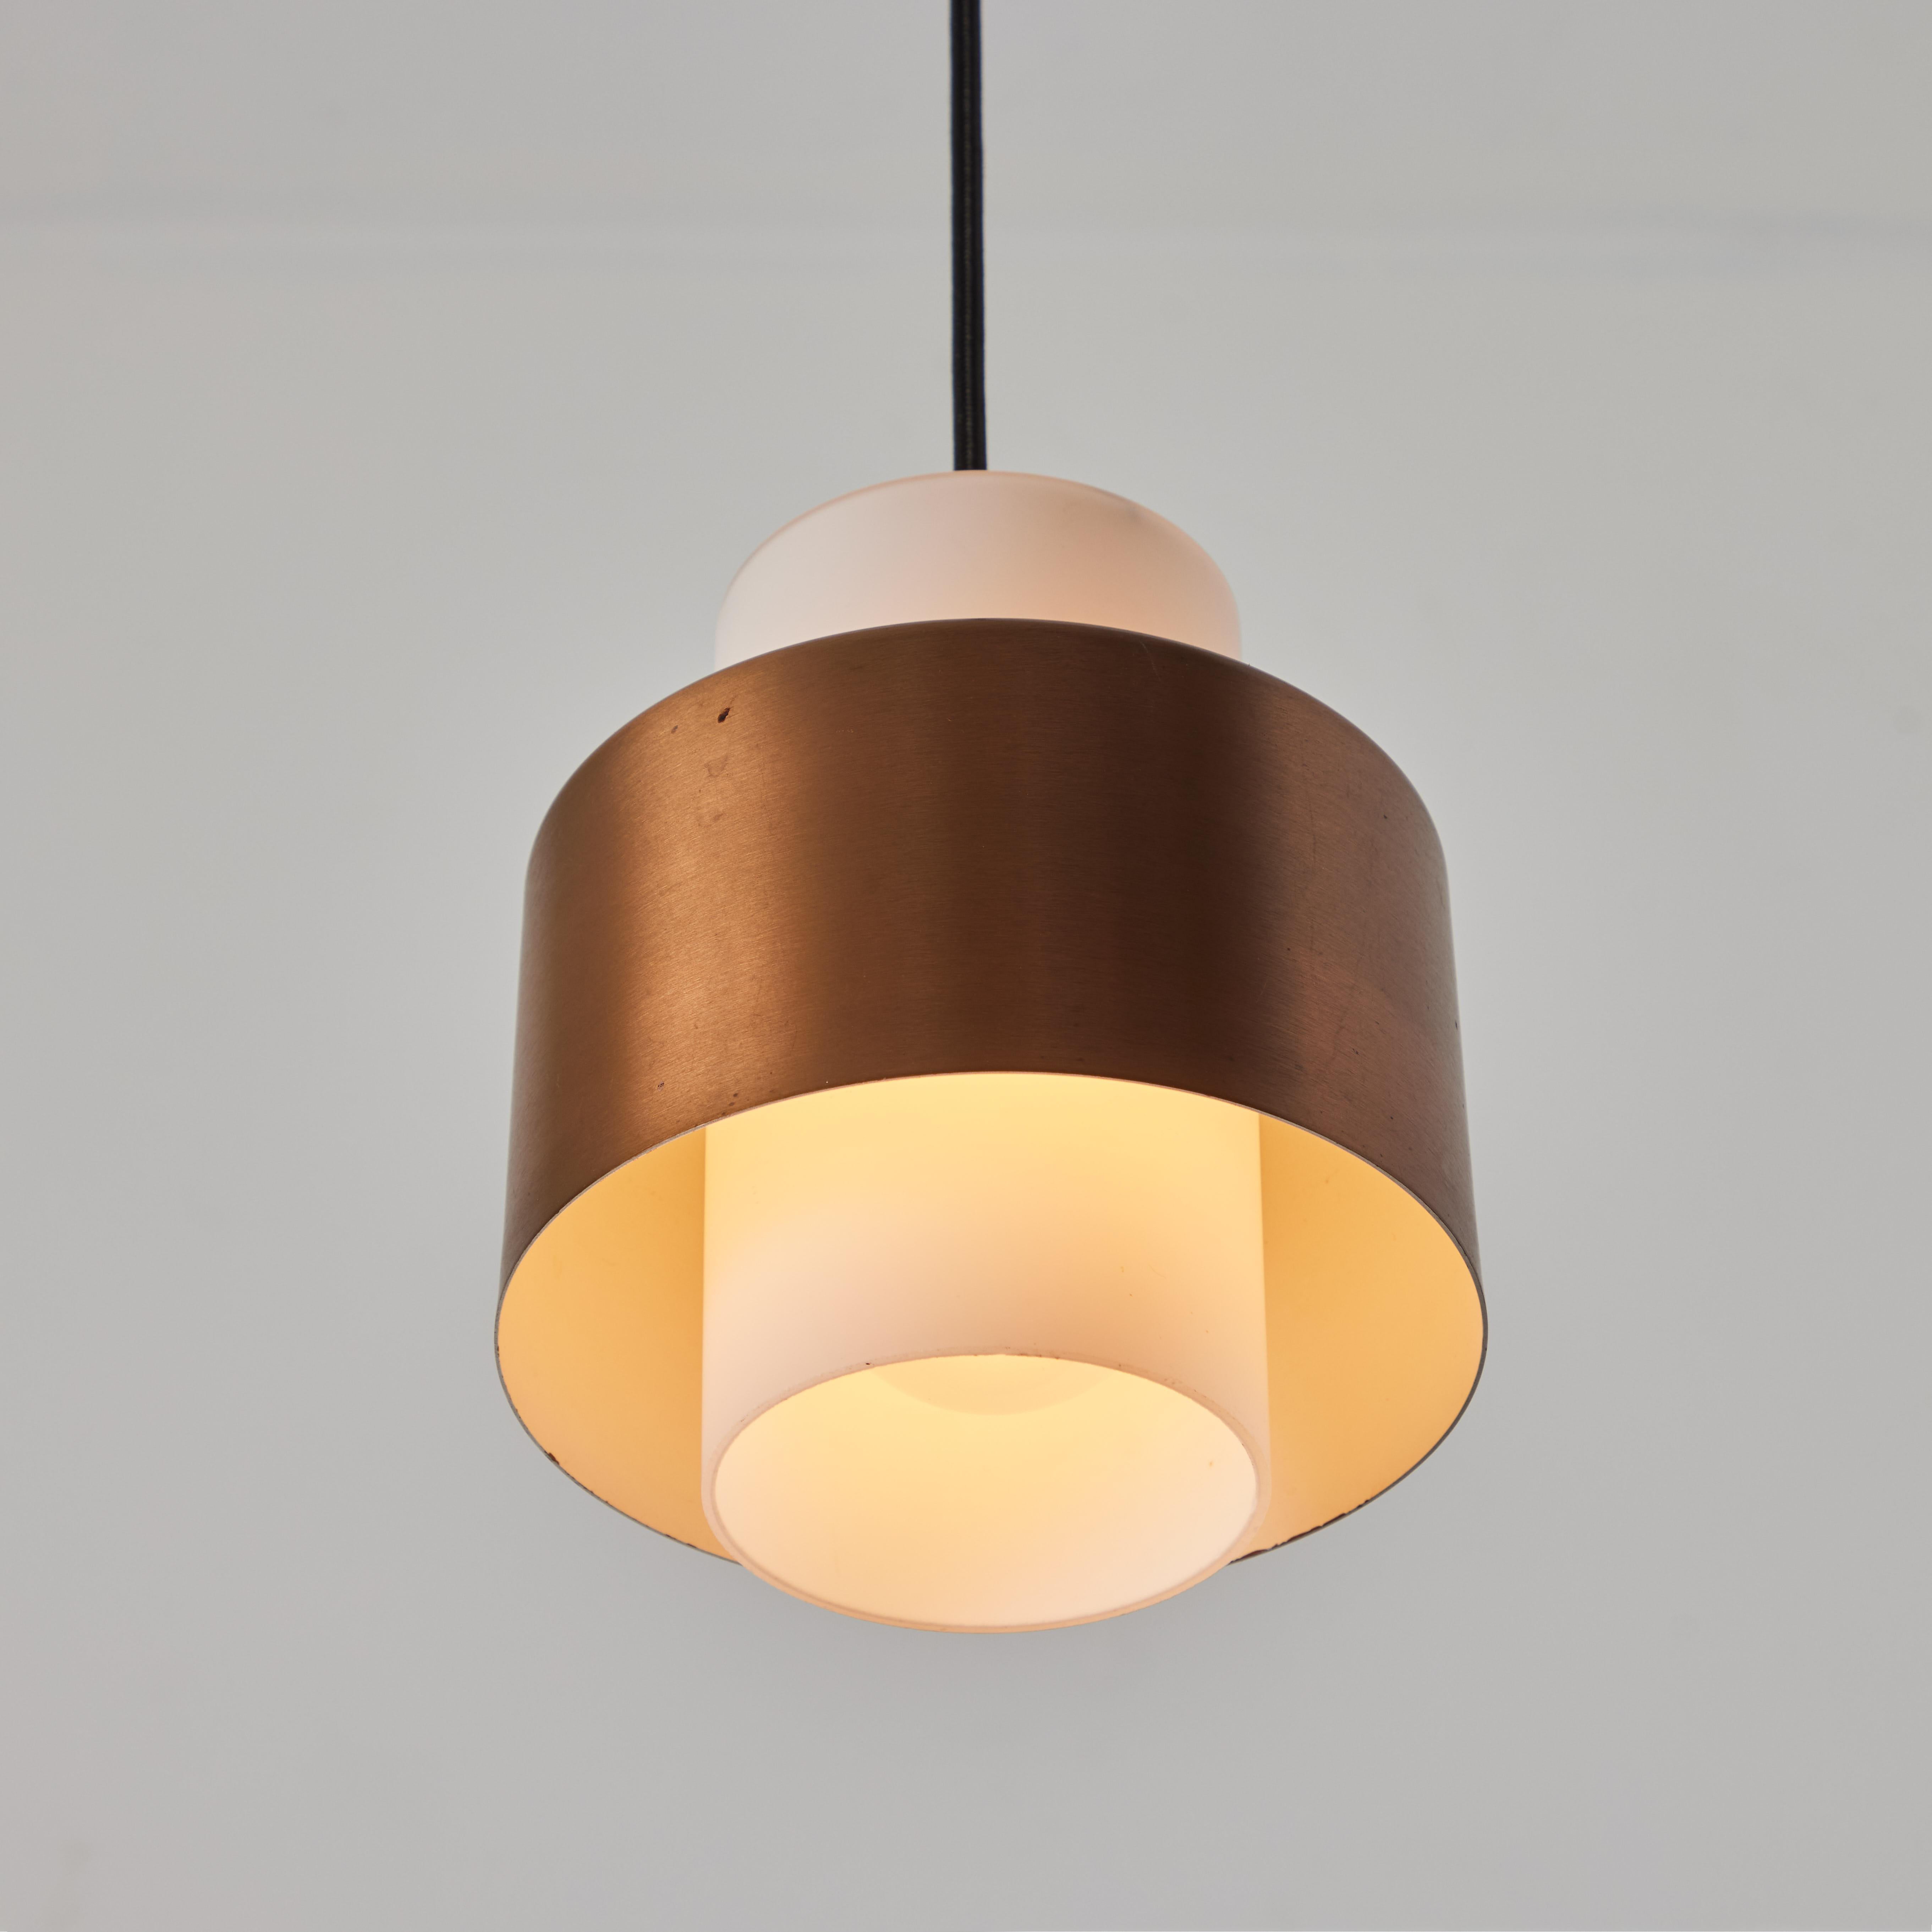 1960s Opaline Glass & Copper Pendant Lamp Attributed to Stilnovo.

A quintessentially 1950s Italian design executed in opaline glass with copper shade. A highly functional and sculptural suspension light of attractive scale and incomparable